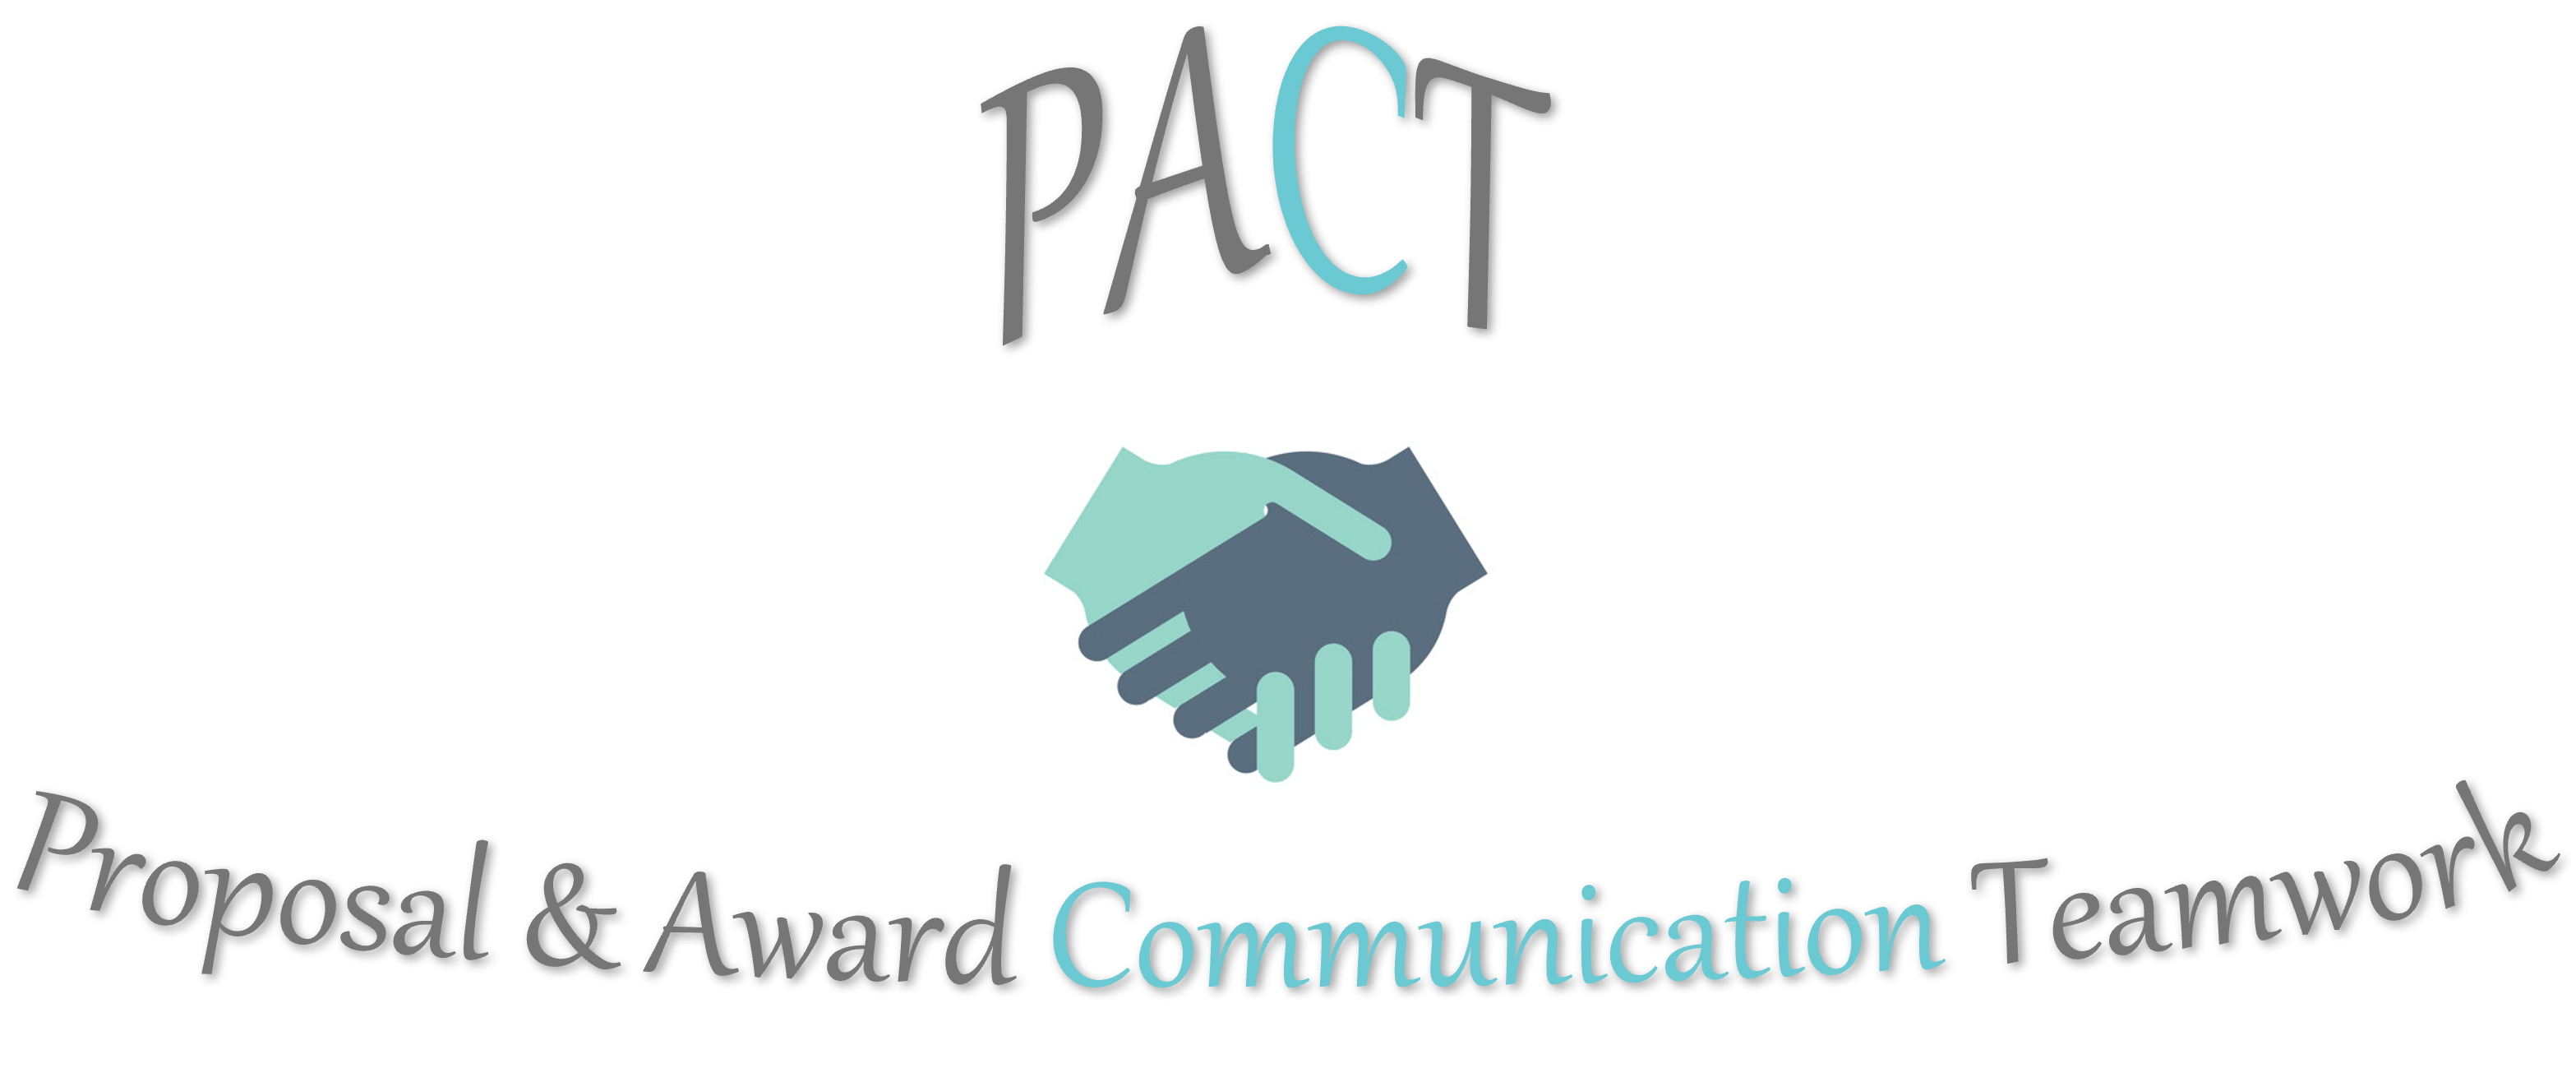 PACT image